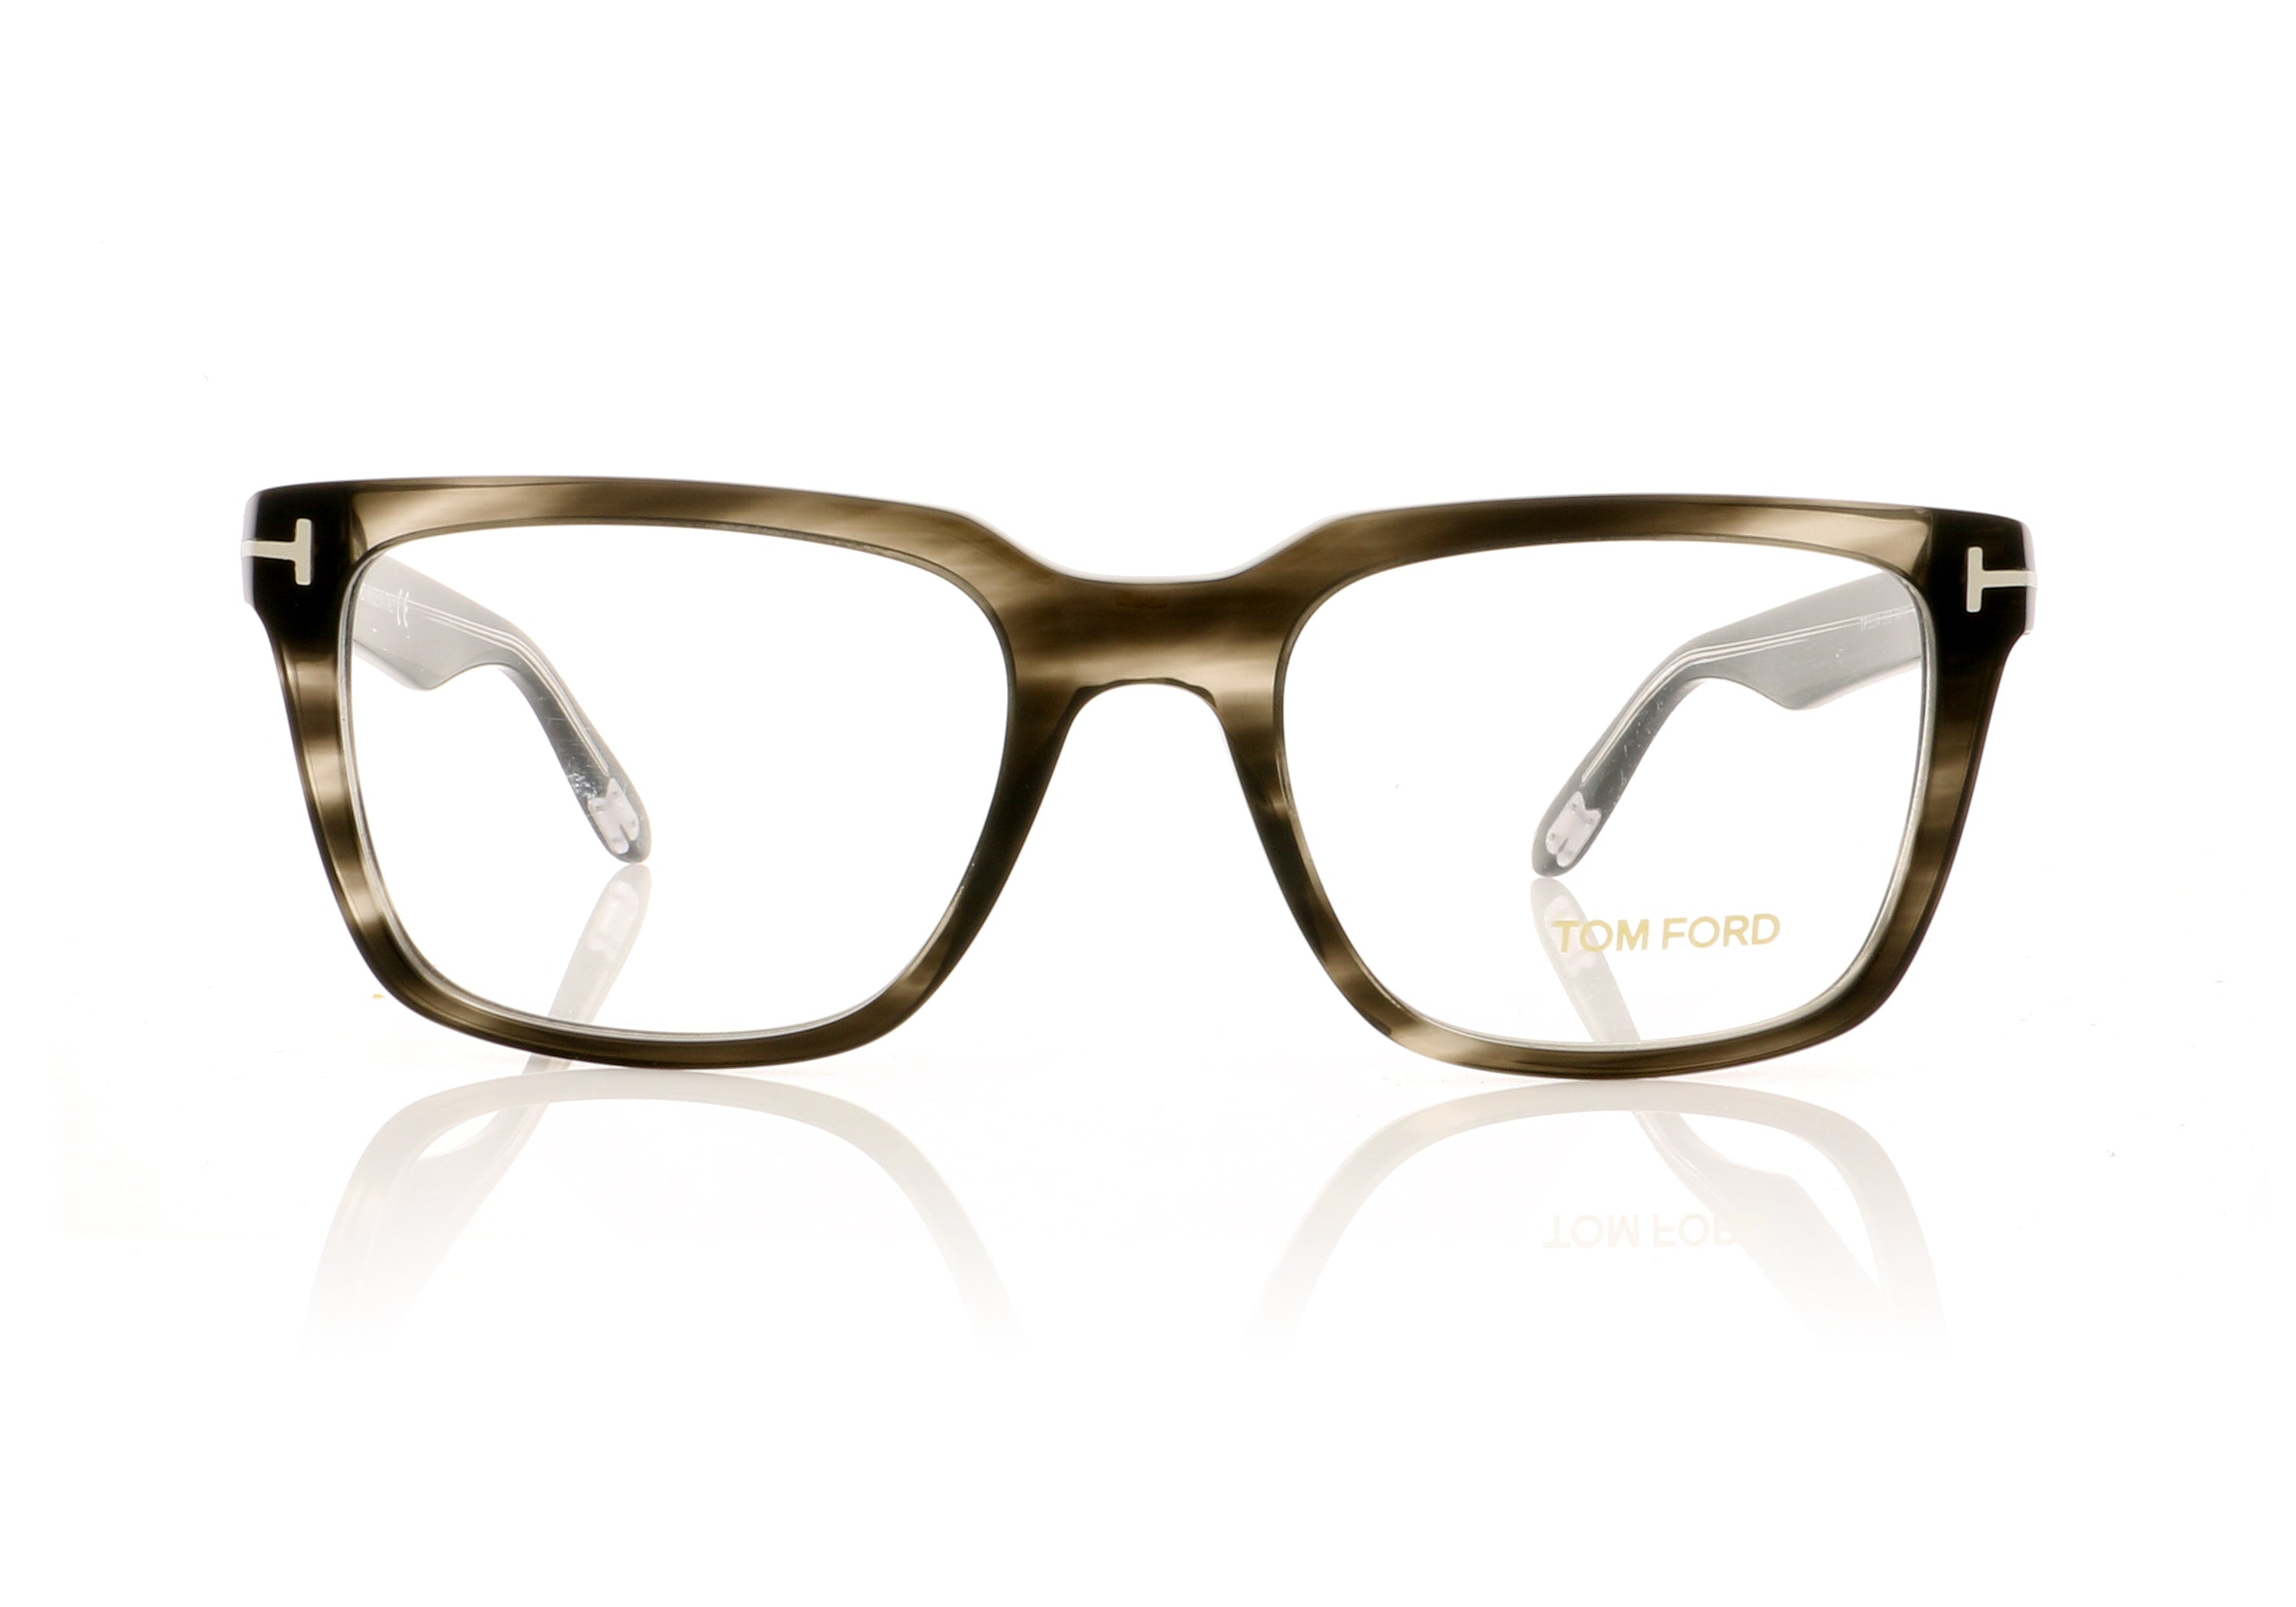 Tom Ford TF5304 93 Light Grey Glasses | The Eye Place